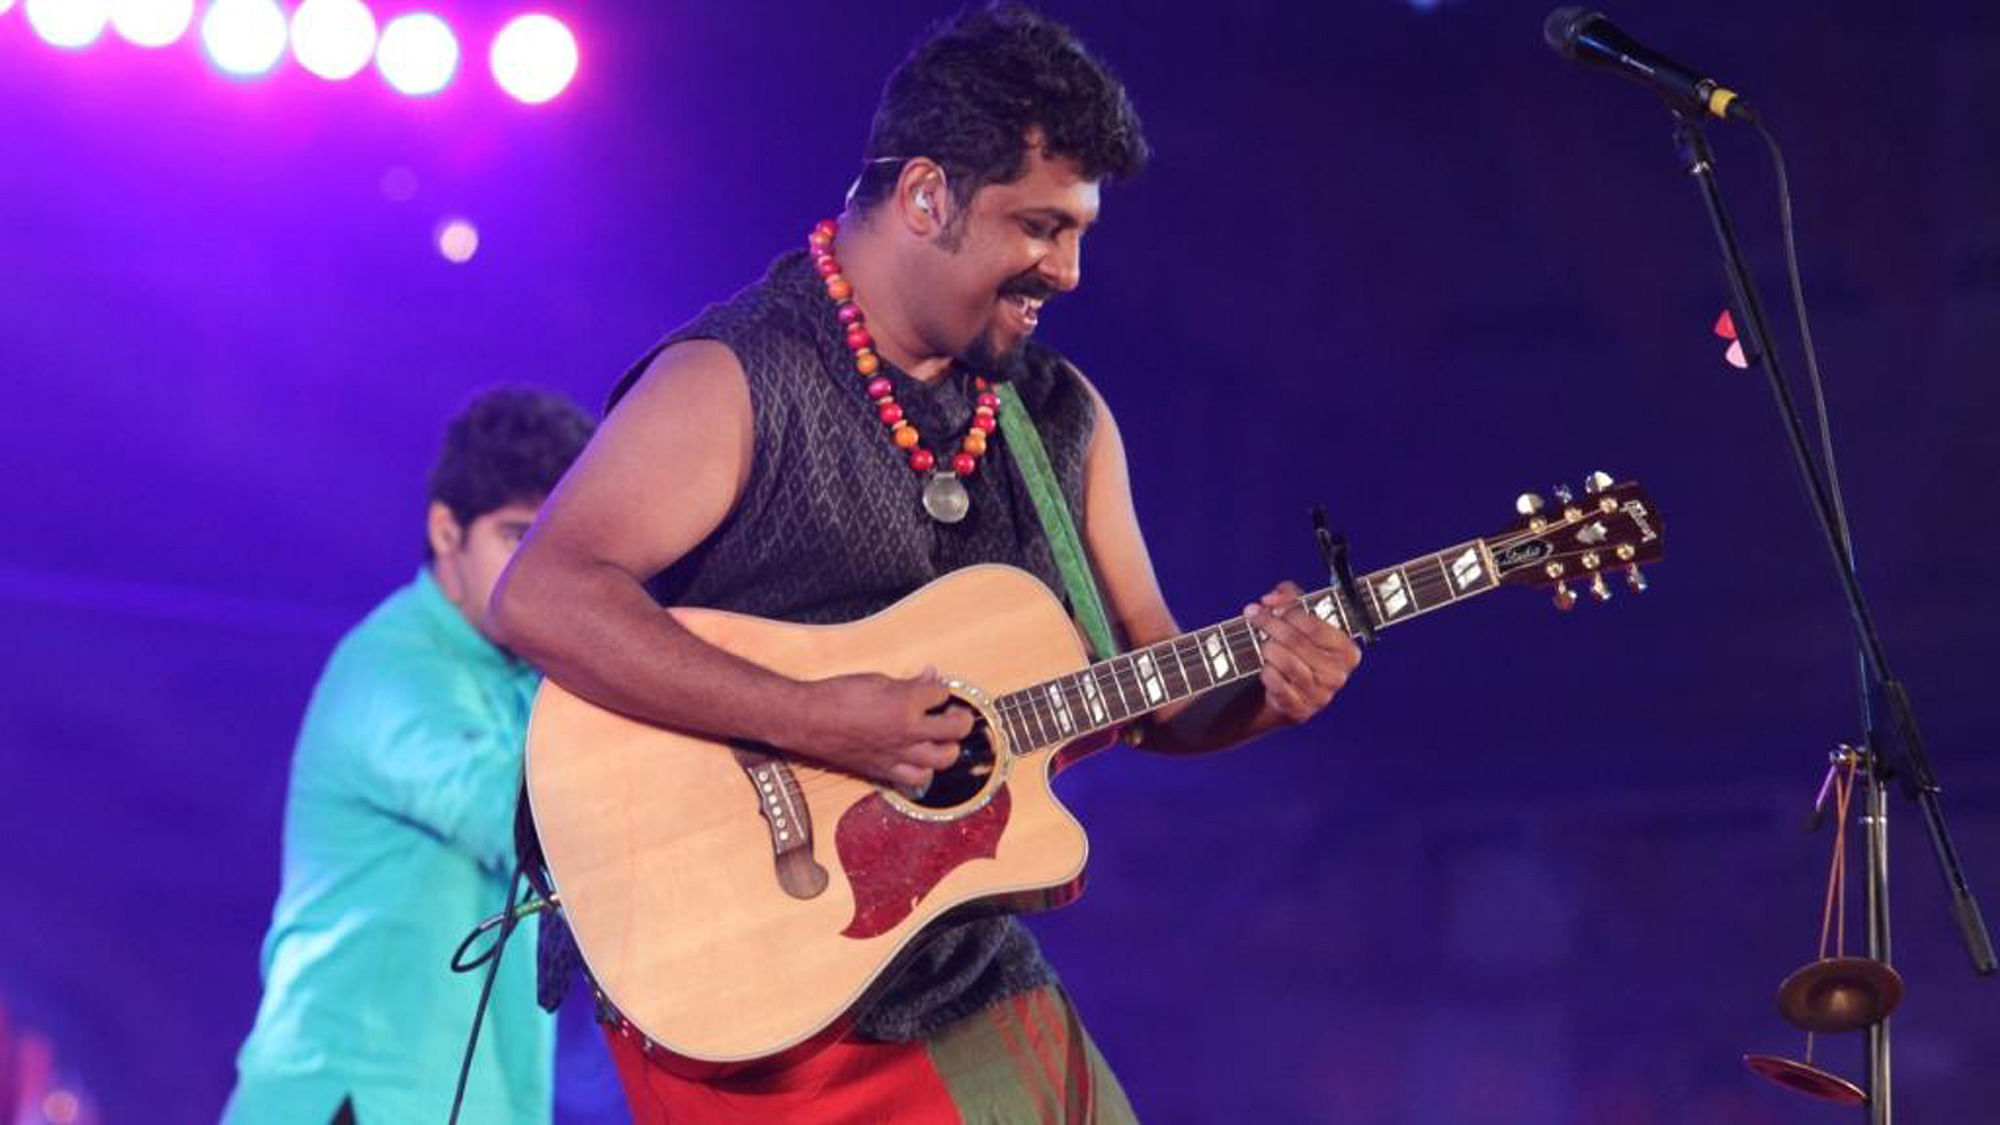 The Raghu Dixit project will be one of the amazing acts to look forward to at the Udaipur World Music Festival. (Photo Courtesy: Seher)